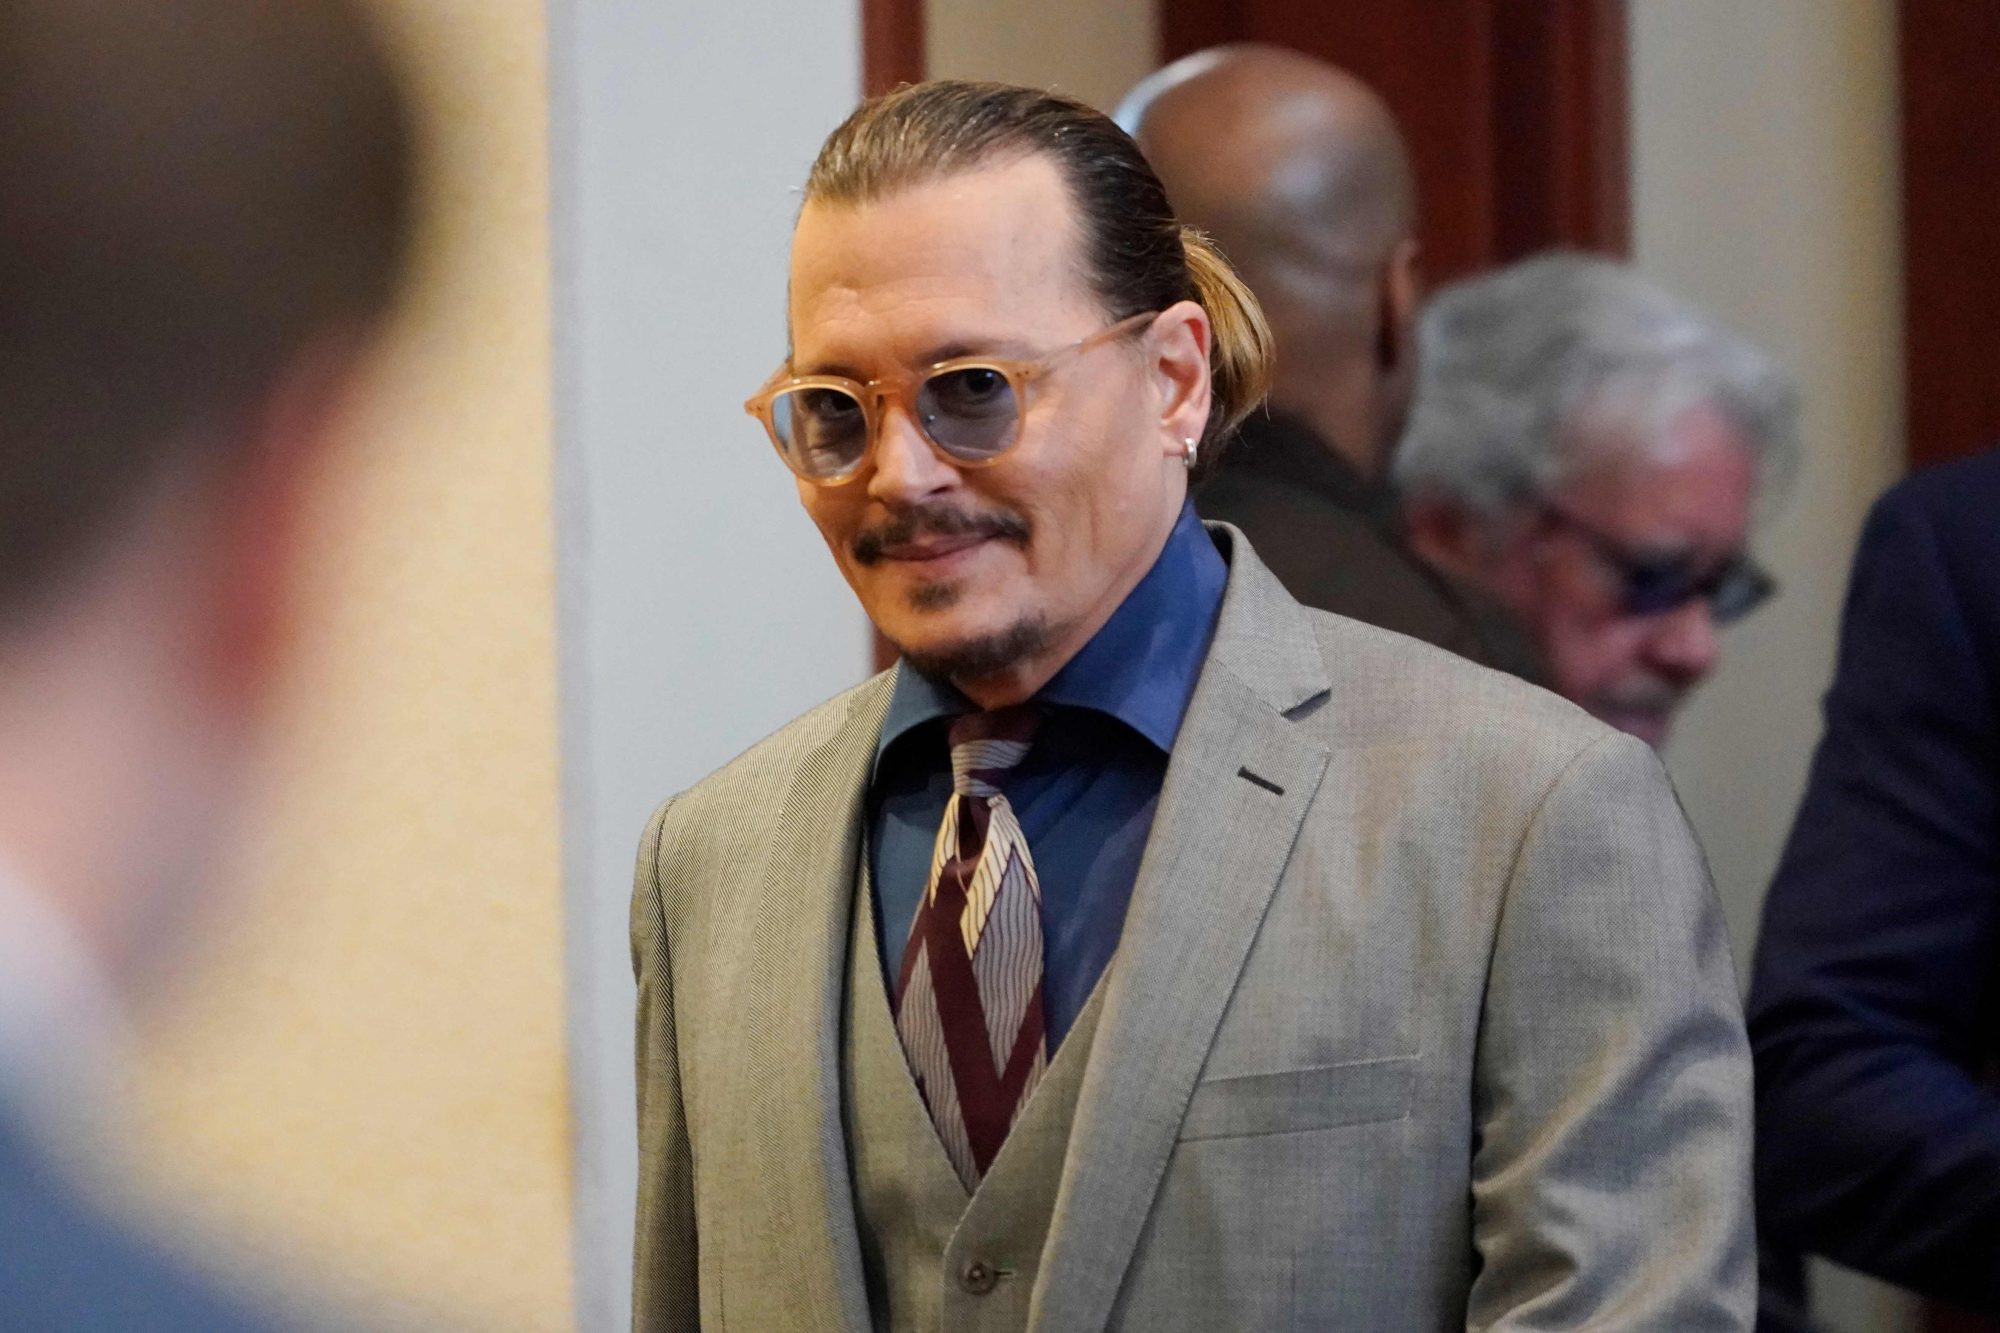 Why is Johnny Depp still the face of Dior Sauvage  The Independent